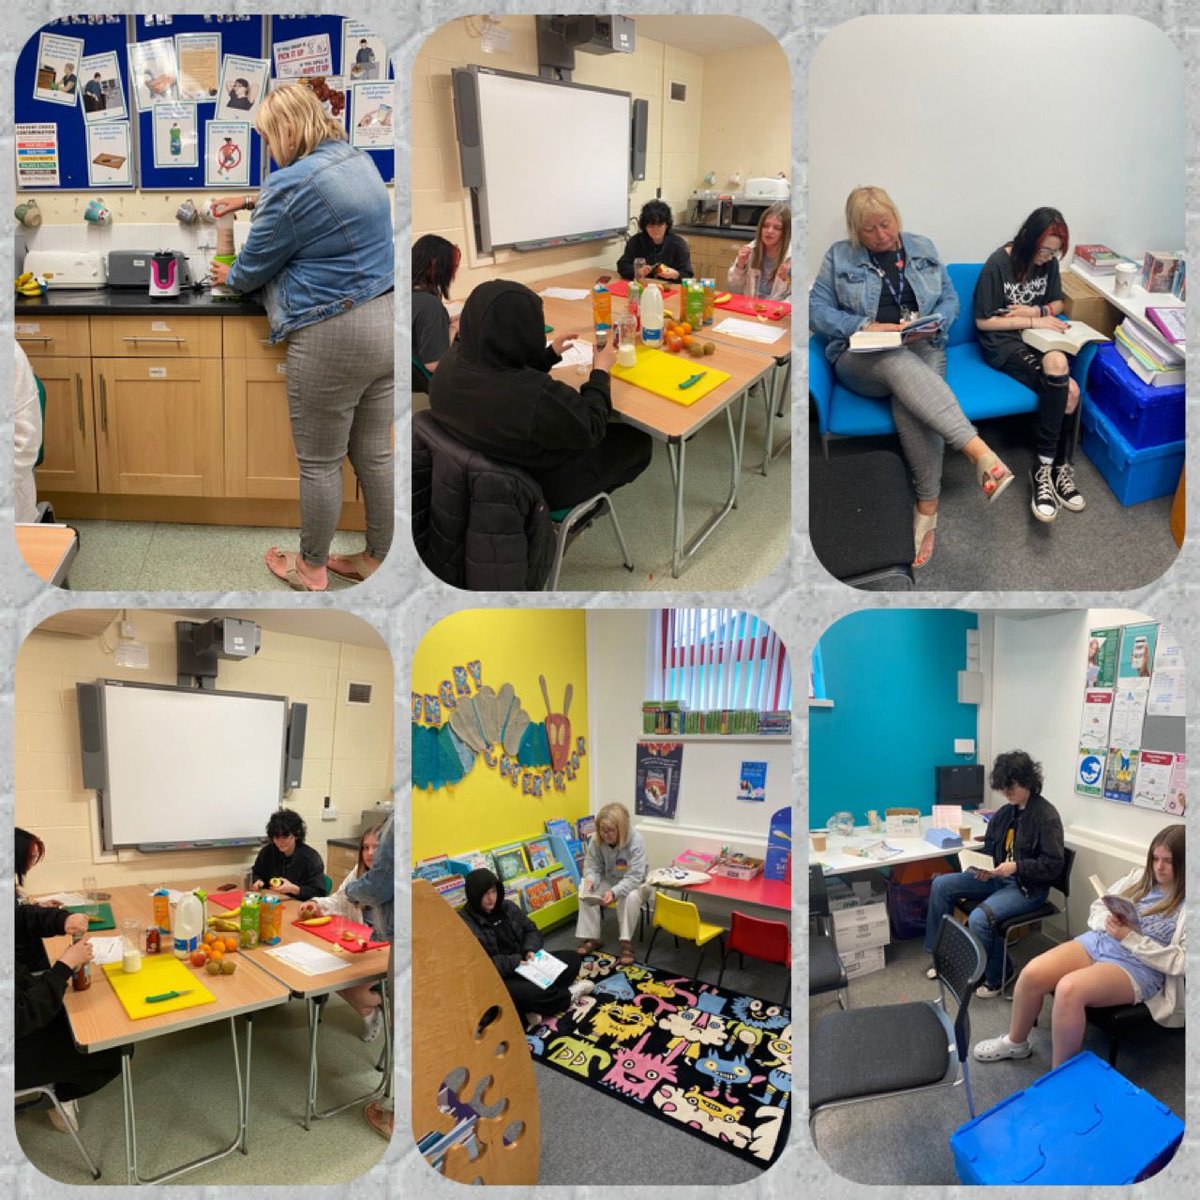 Happy Youth Work Week 2023
Today we walked to the local library, enjoyed a hot drink & all read a good book. Afterwards we made delicious fruit smoothies! 
Fantastic engagement & participation ⁦@youth4u1⁩
#YouthWorkWeek2023
#wythnosgwaithieuenctid23